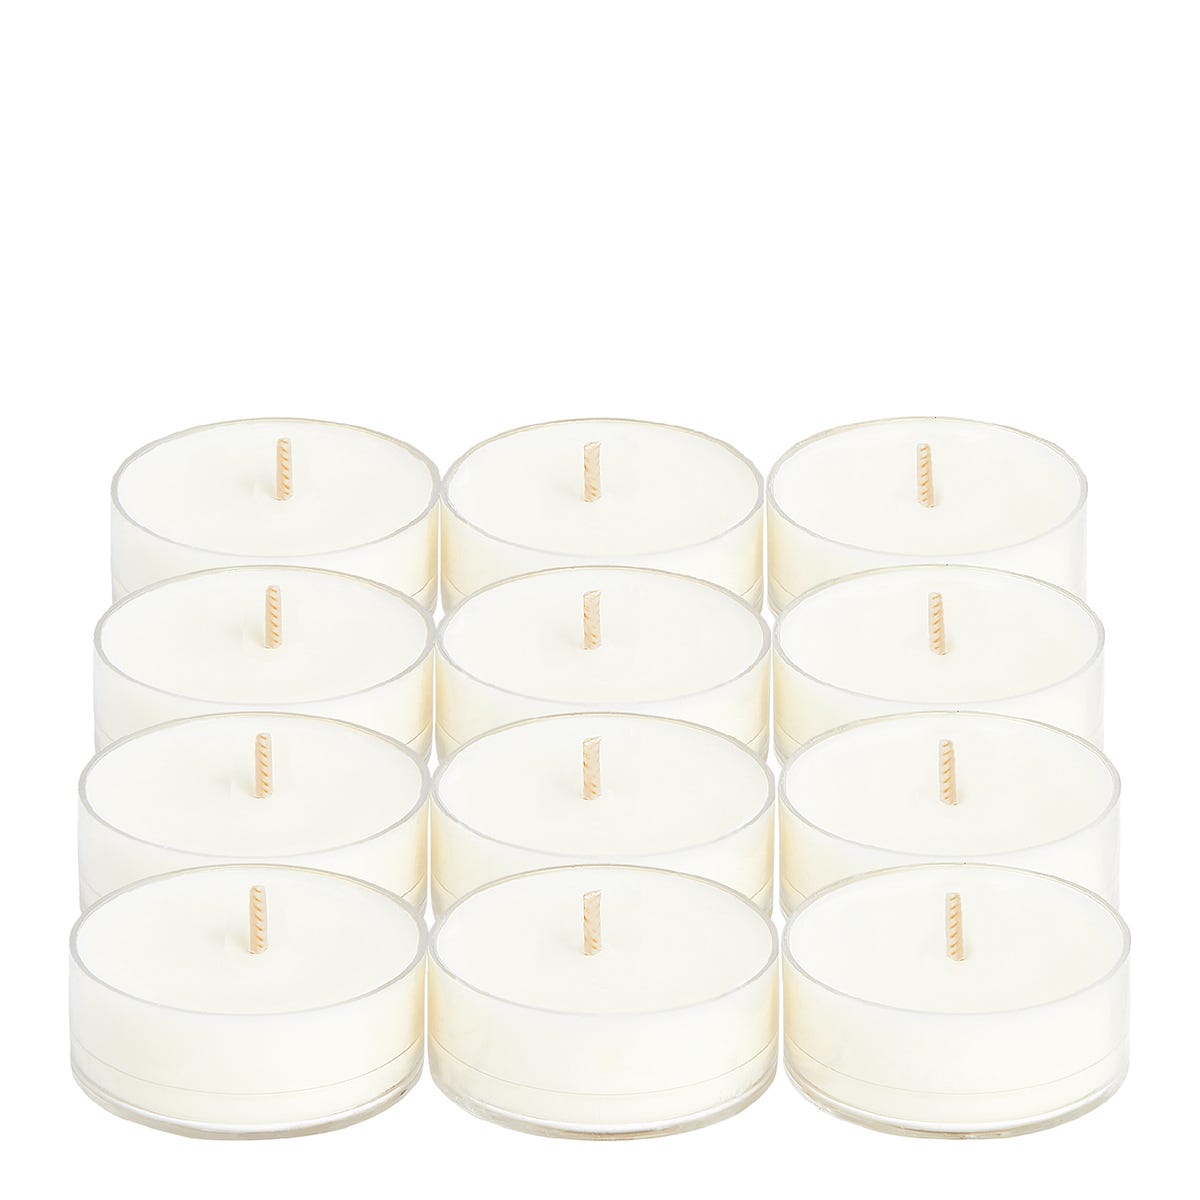 Unscented 100% Soy Universal Tealight® Candles - PartyLite US